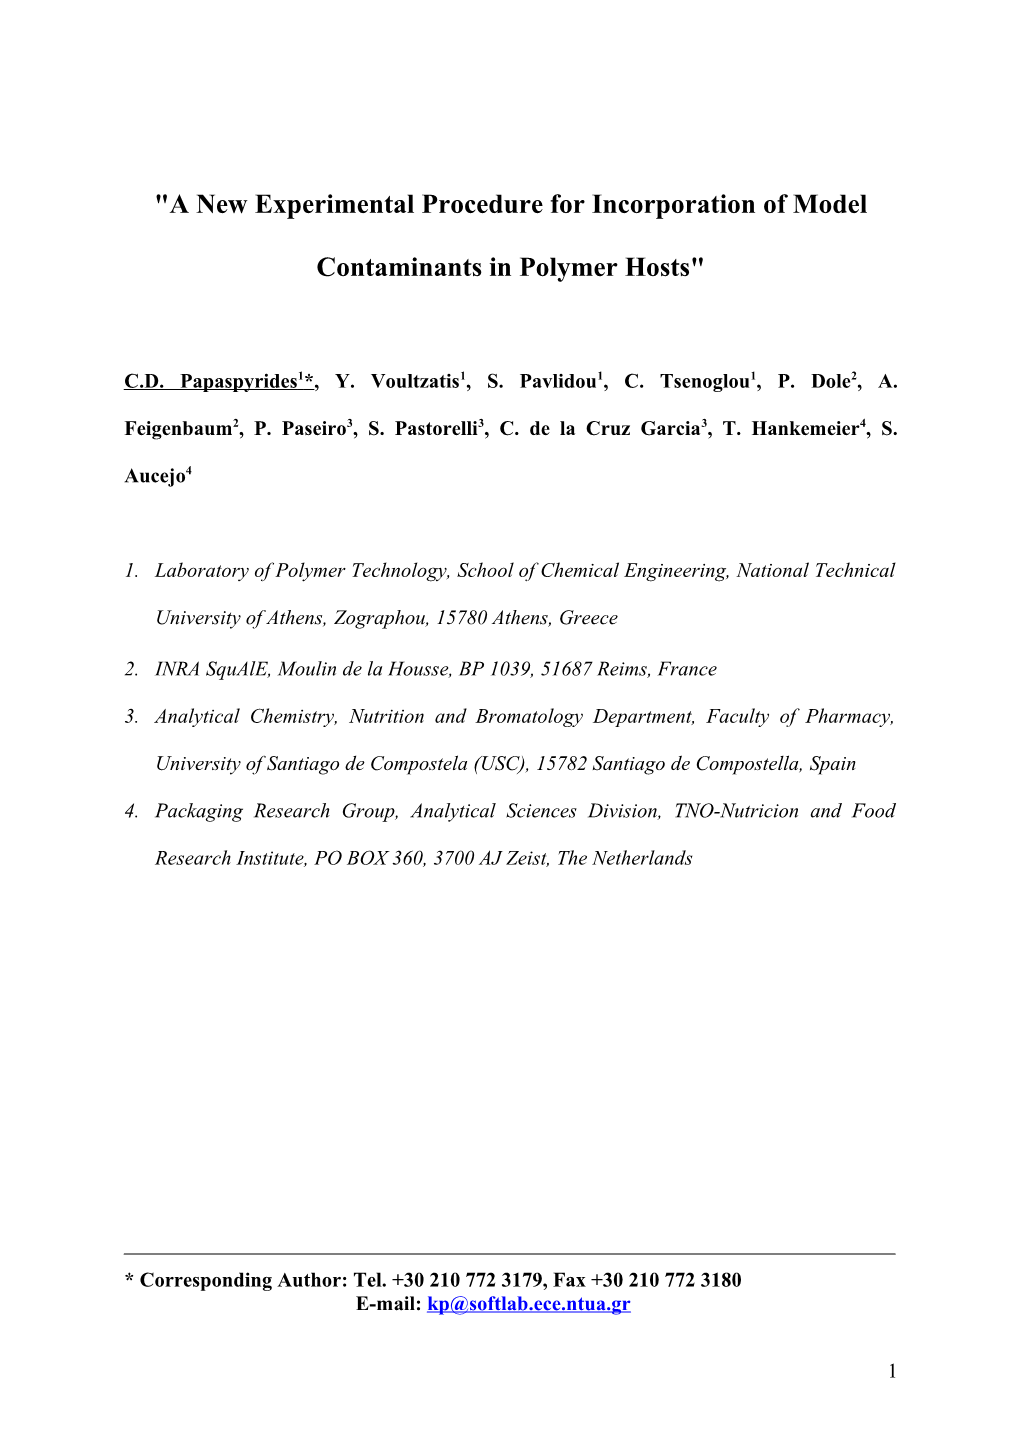 Procedures for Incorporation of Model Contaminants in Polymer Hosts